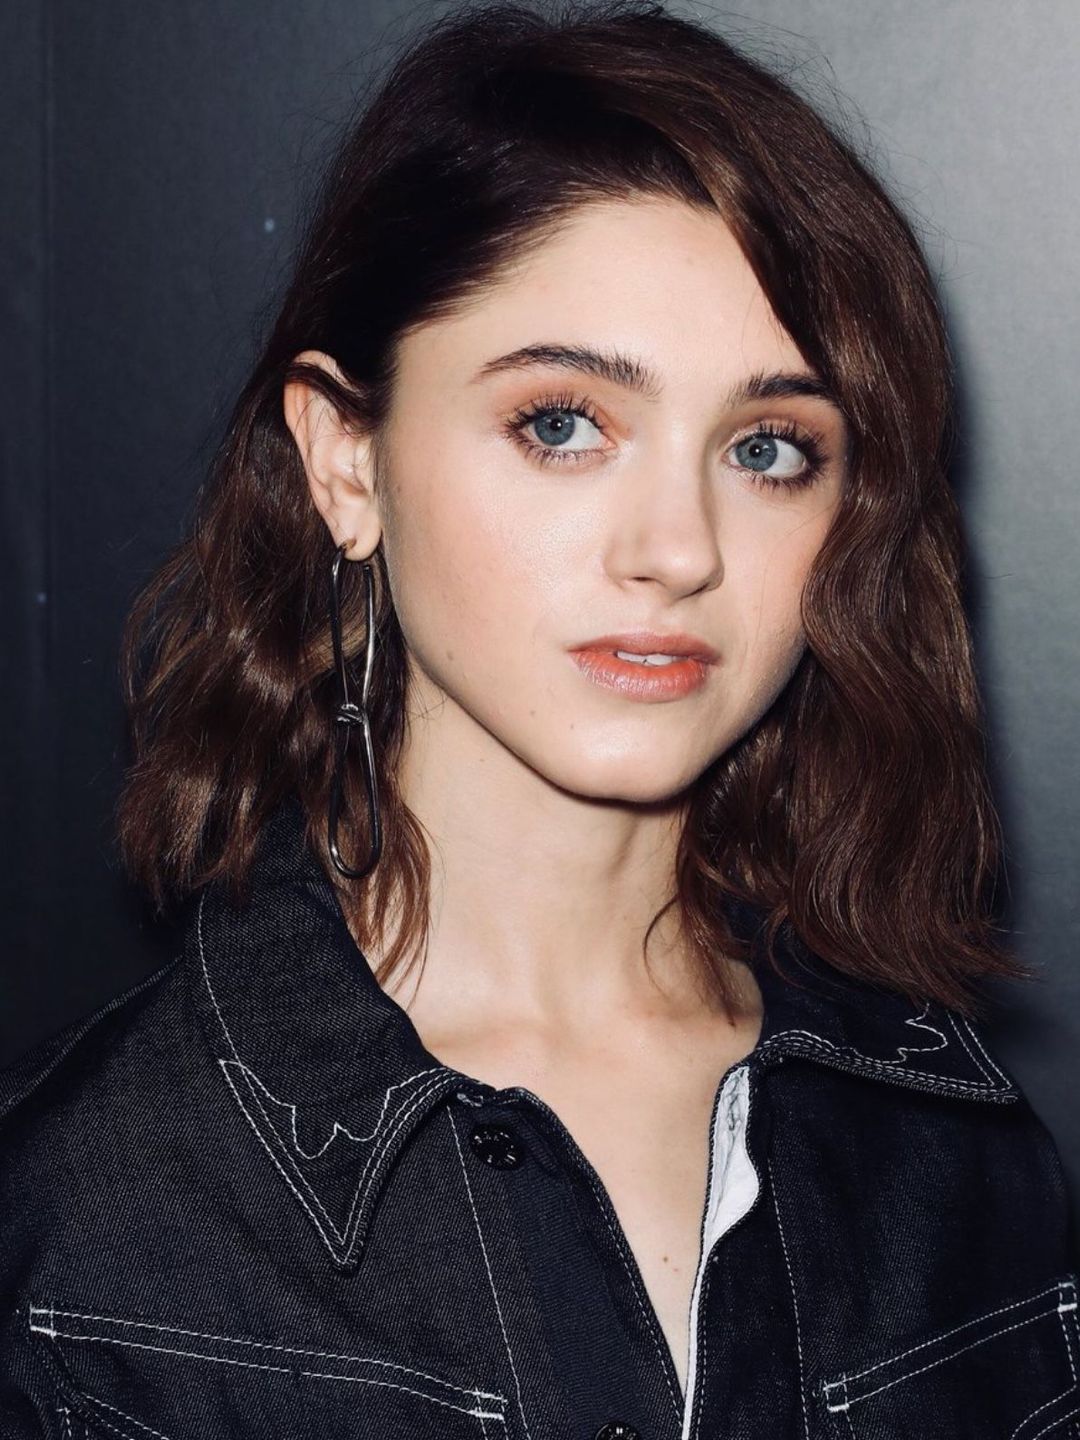 Natalia Dyer does she have kids